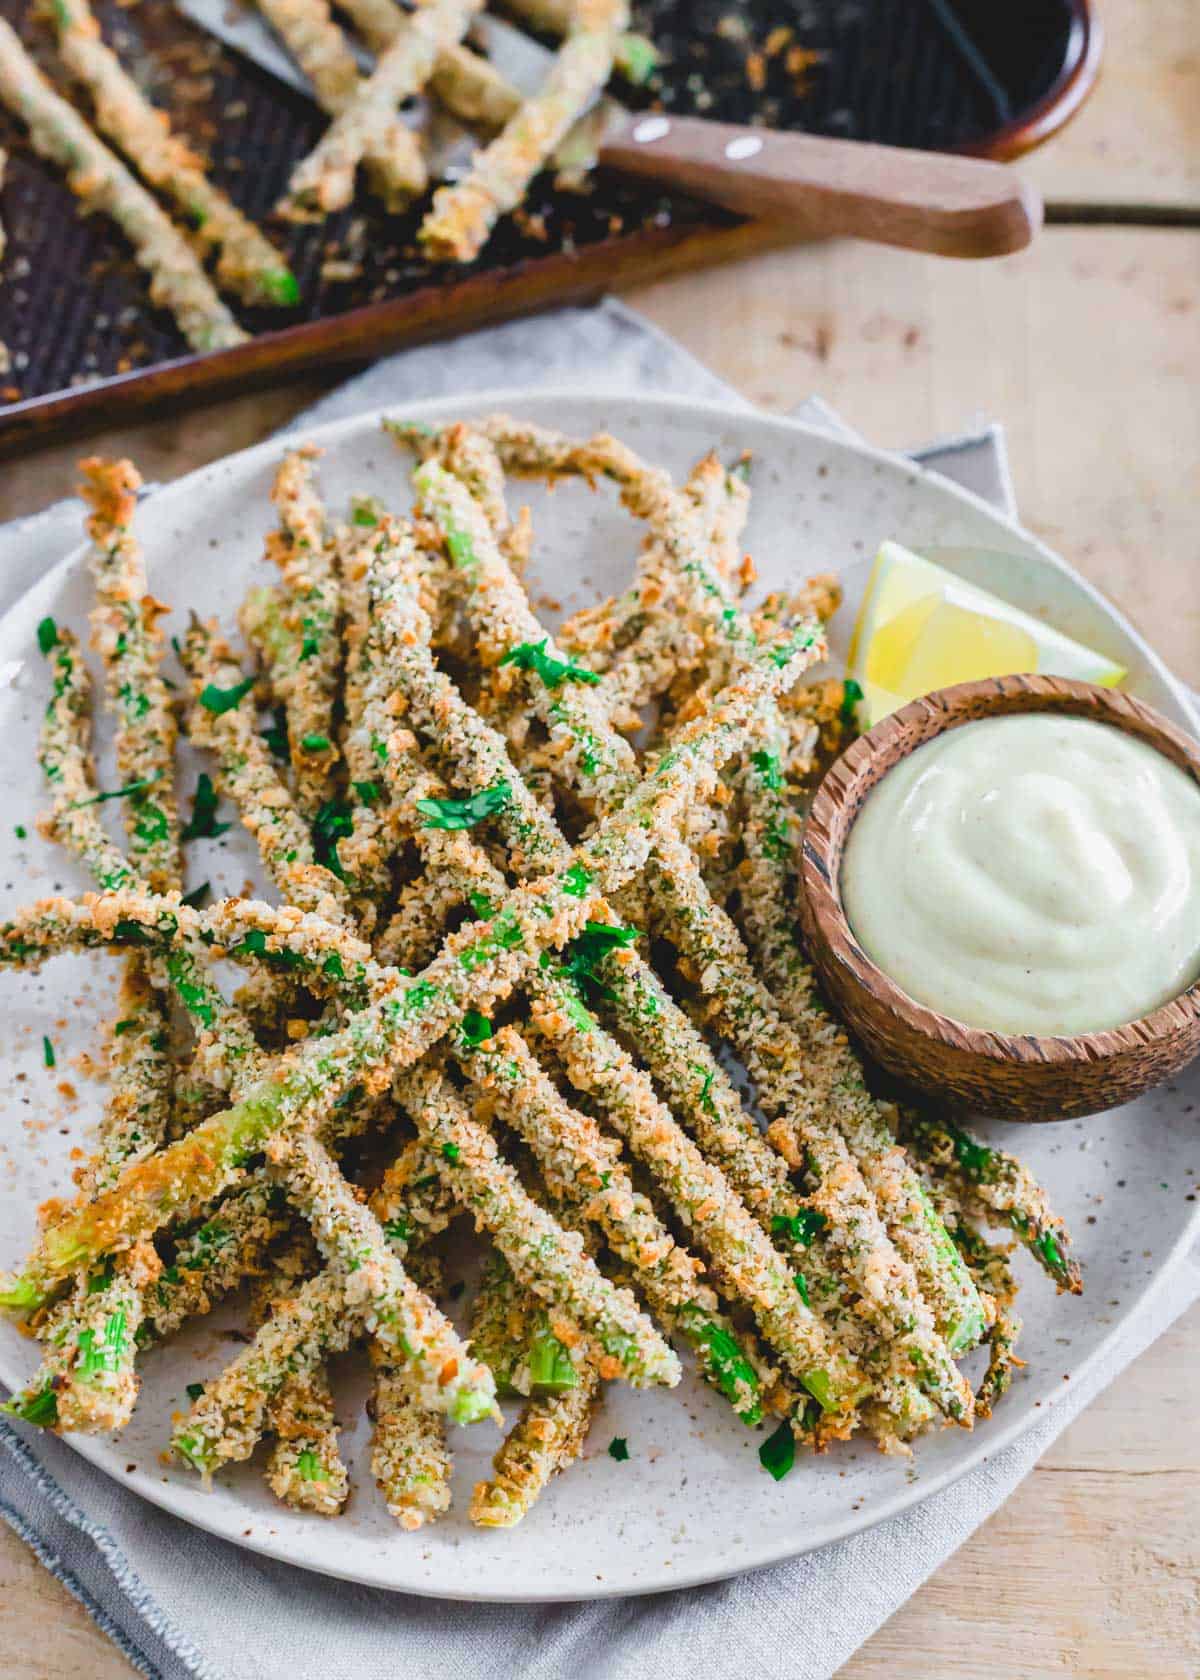 Crispy baked asparagus fries on a plate with lemon wedge and dipping sauce.